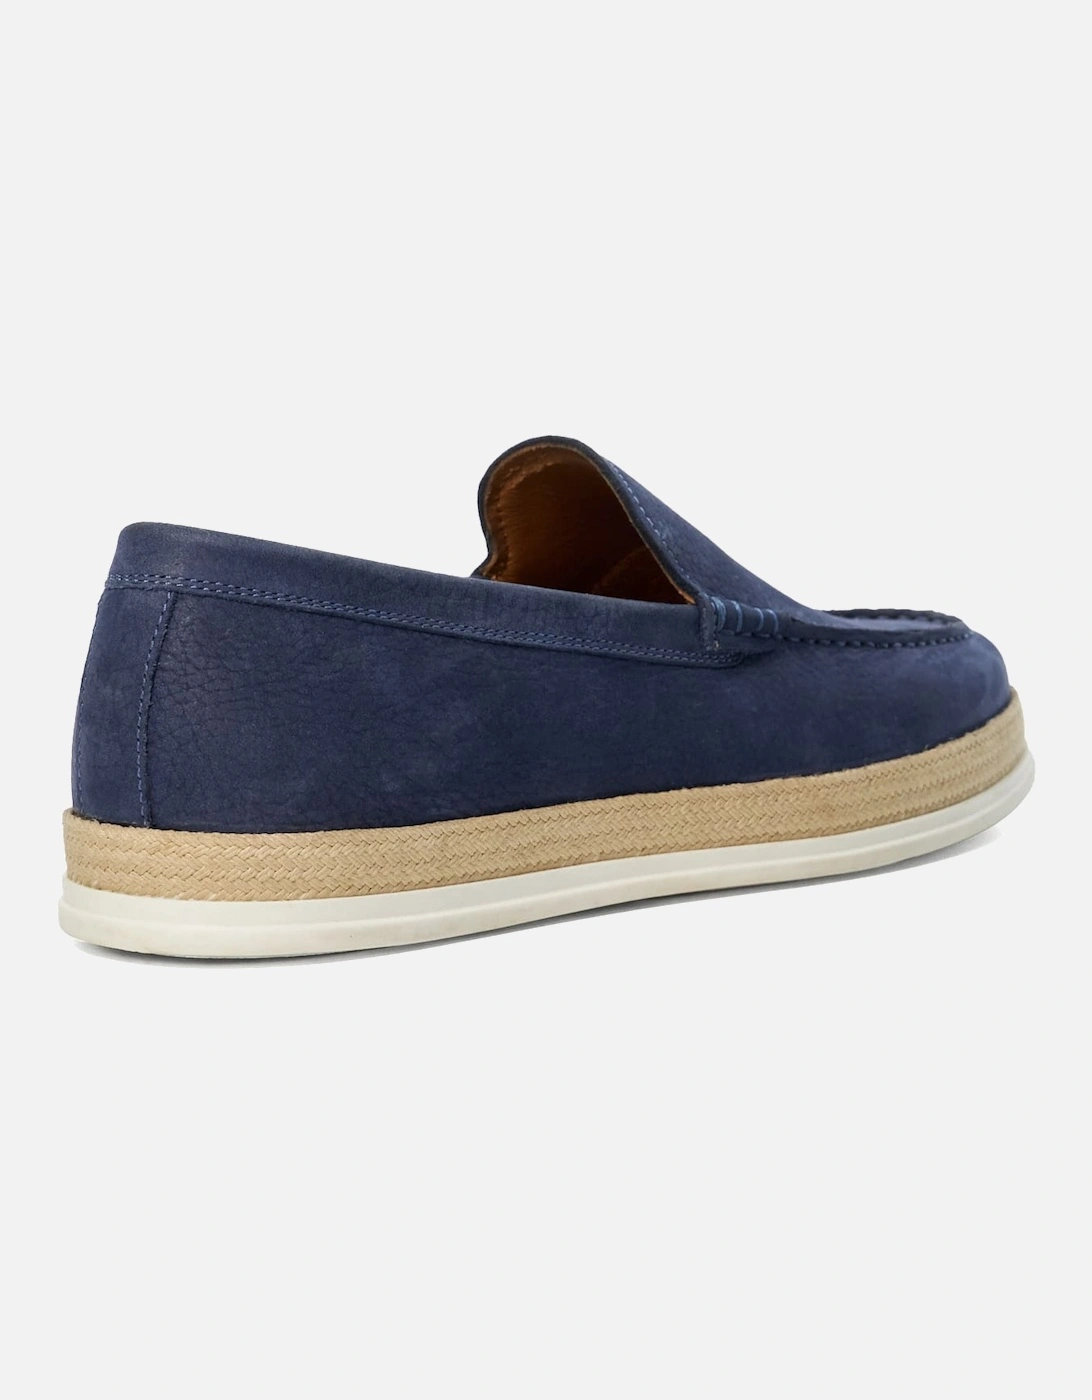 Mens Bountii - Casual Nubuck Loafers